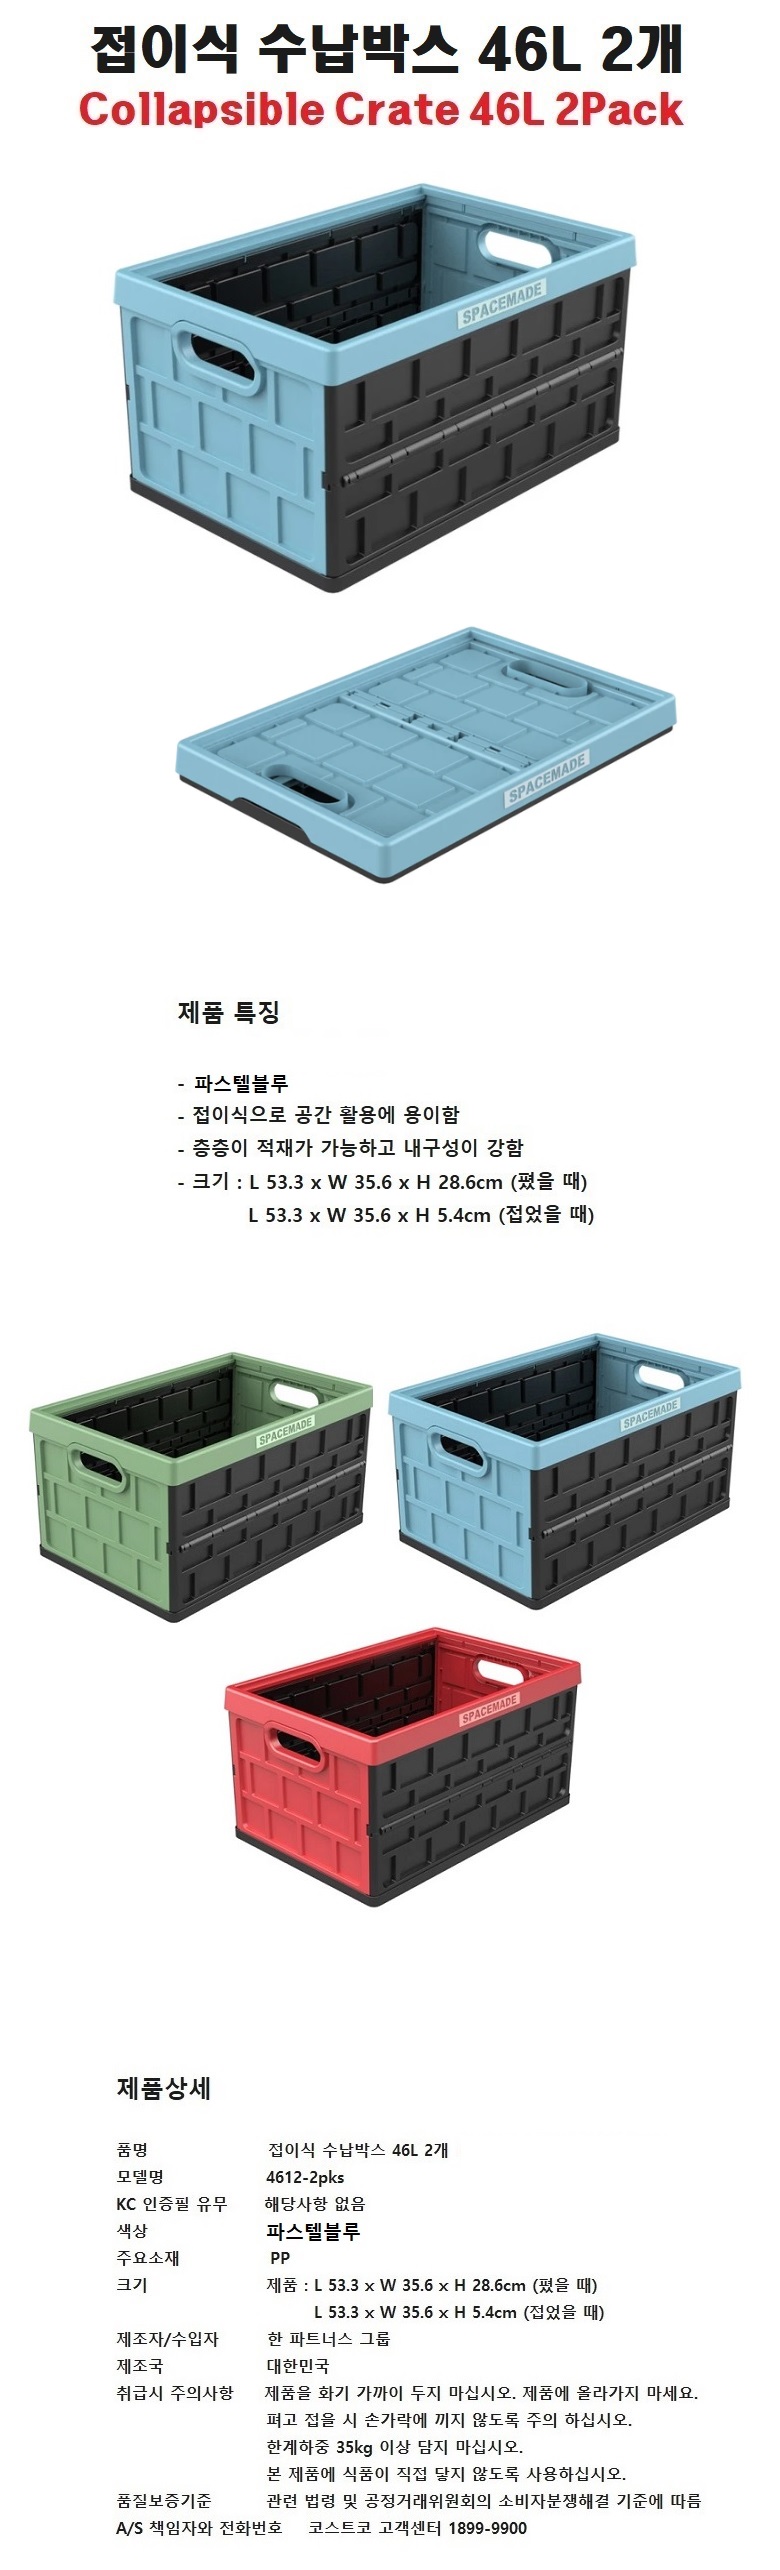 collapsible%20crate46l_blue23990.jpg